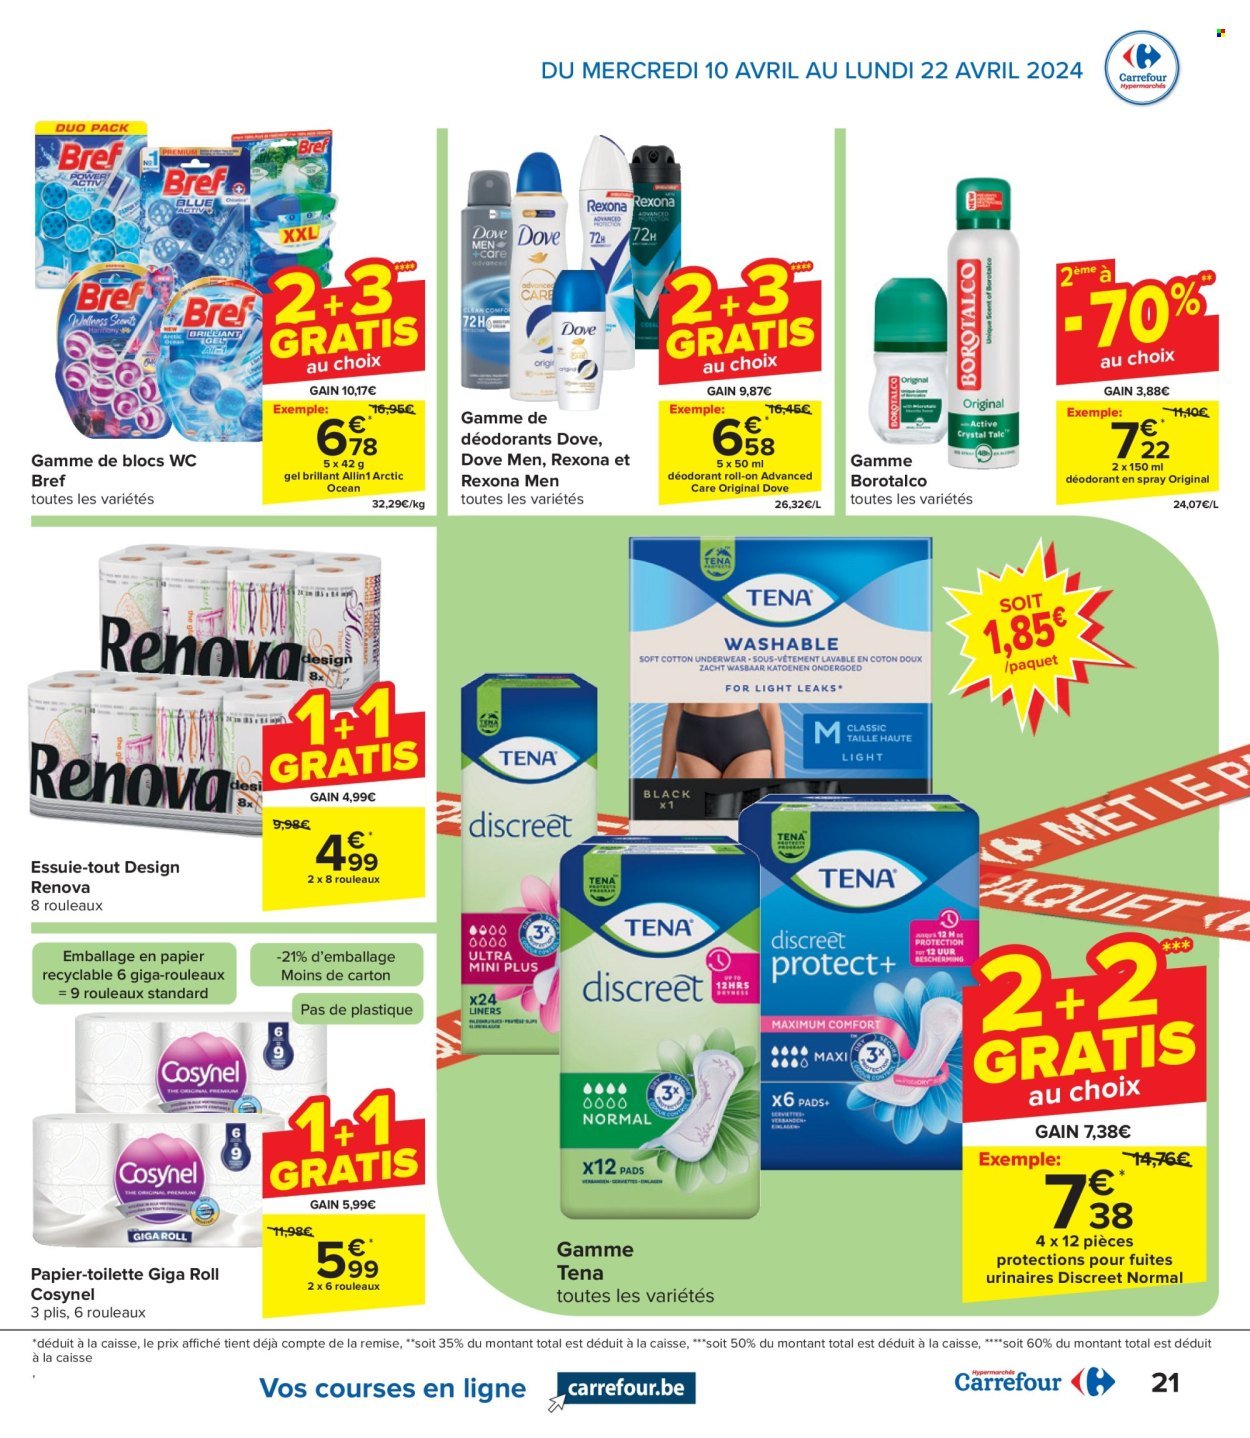 Catalogue Carrefour hypermarkt - 10.4.2024 - 22.4.2024. Page 21.